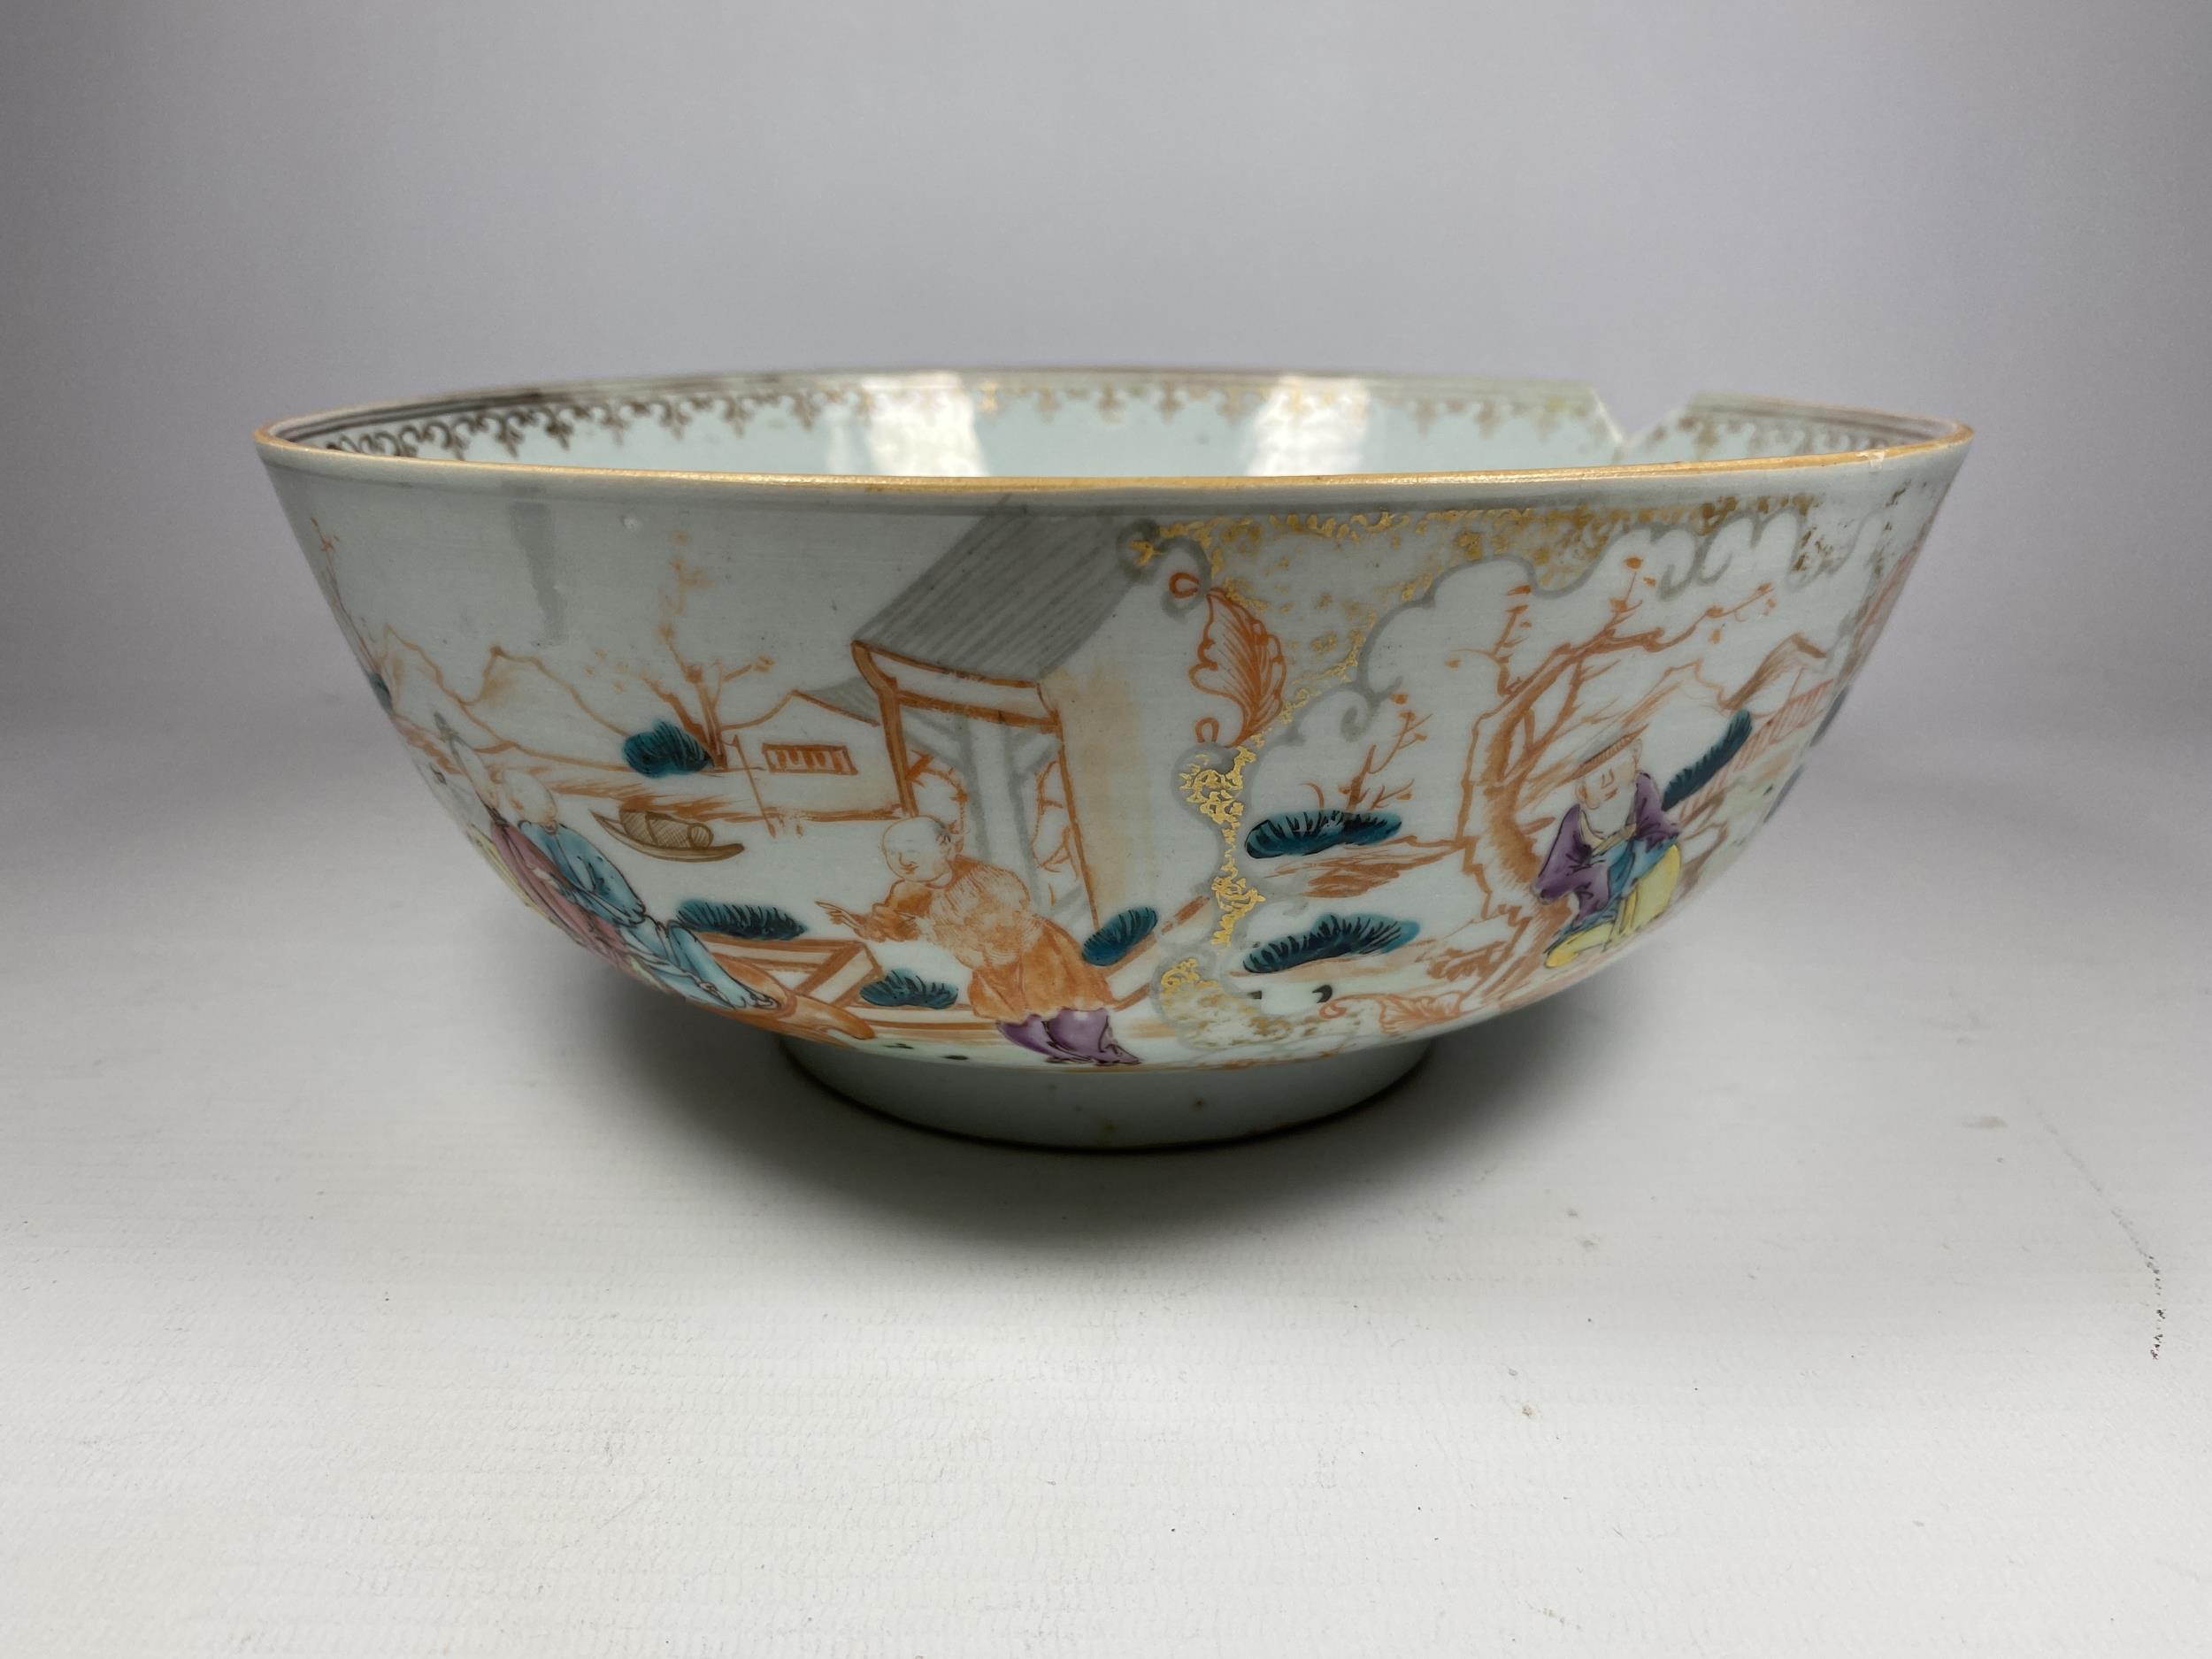 A LATE 18TH CENTURY CHINESE PORCELAIN PUNCH / FRUIT BOWL DEPICTING FIGURES, DIAMETER 23CM (A/F) - Image 2 of 9